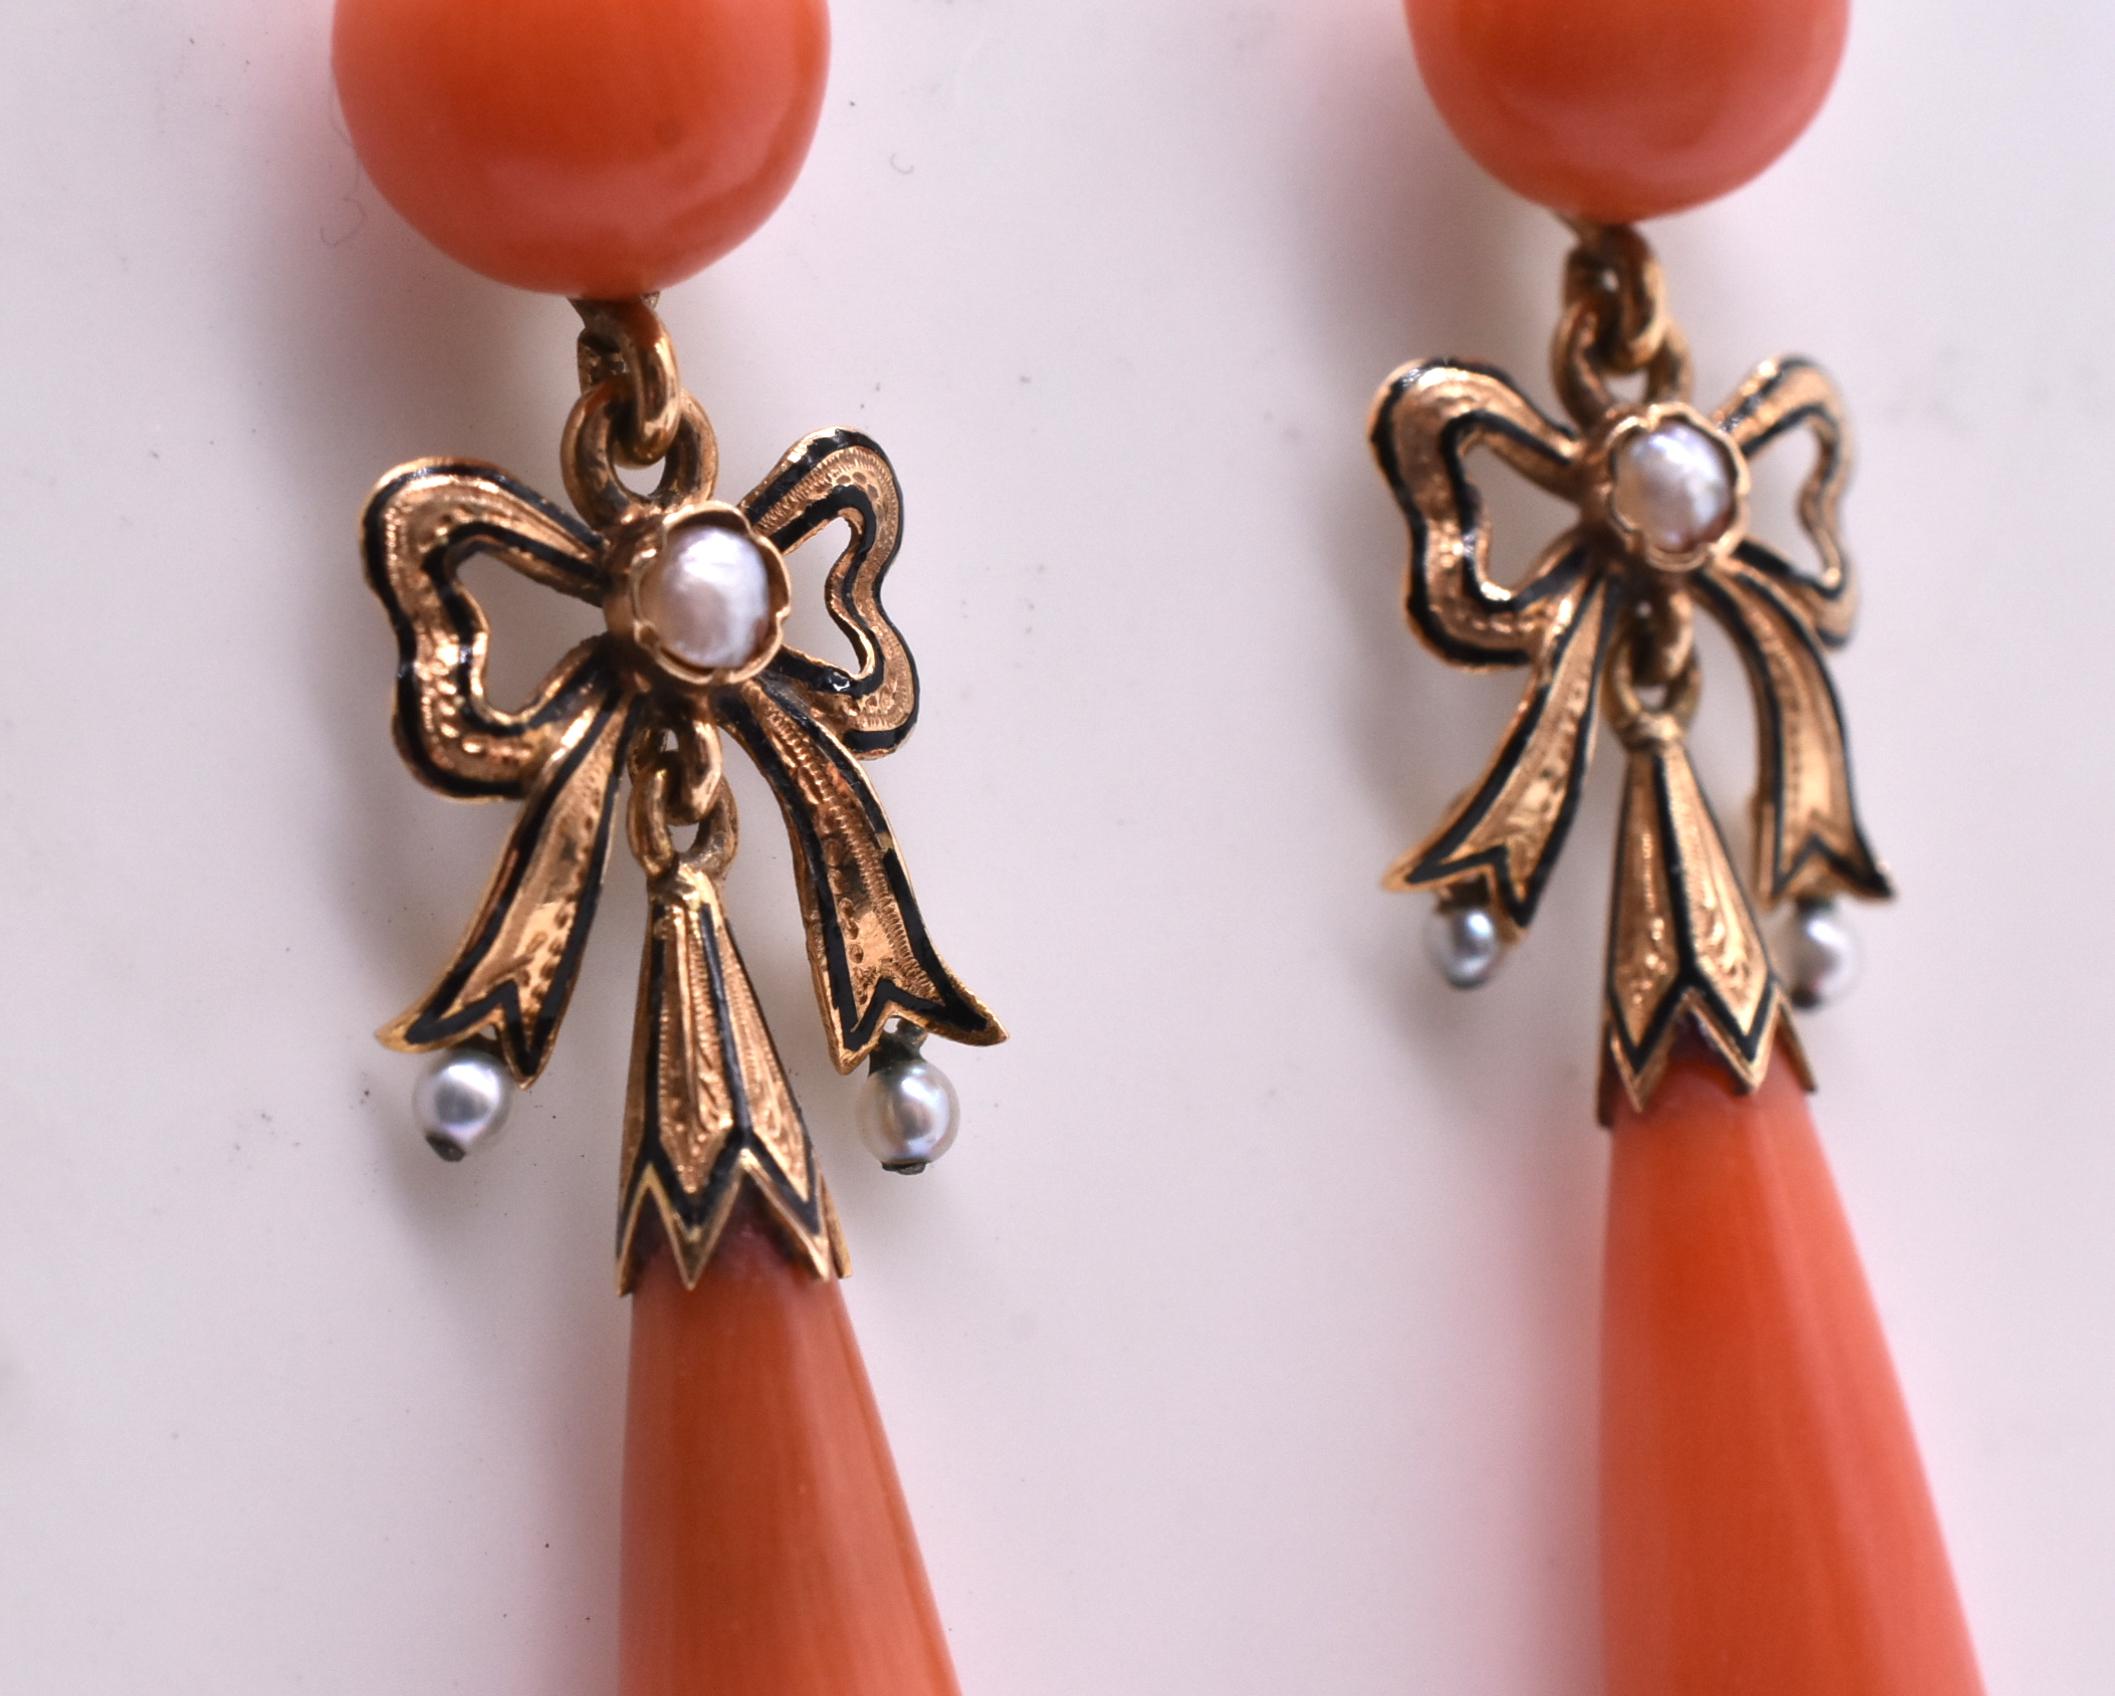 Cabochon Antique Coral Earrings with Pearls and Enamel Bow